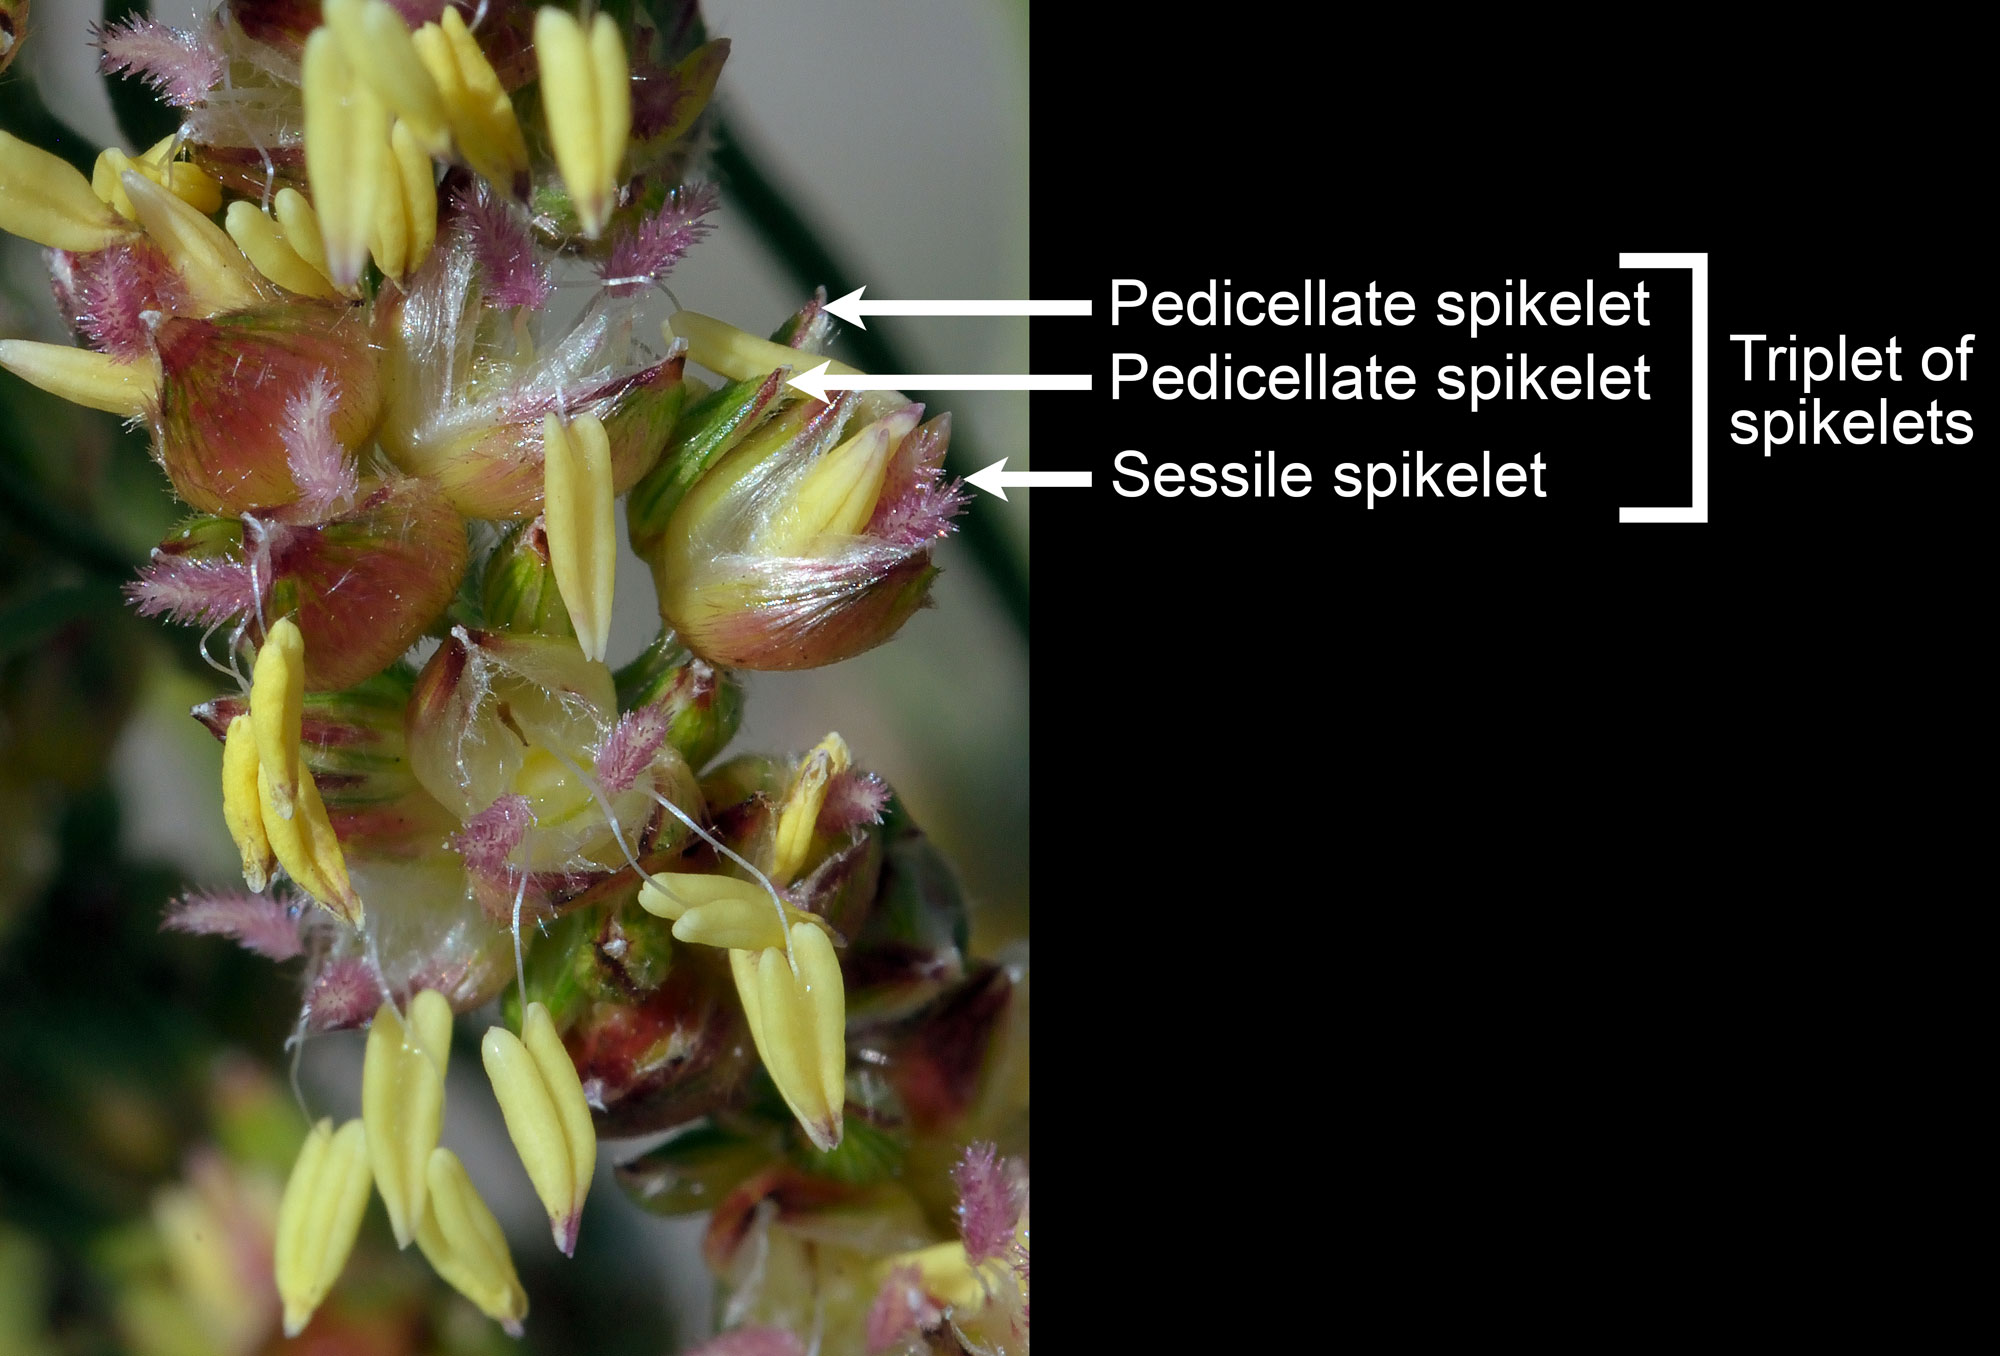 Photograph of a group of spikelets of sorghum on in an inflorescence. Two pedicellate spikelets and a sessile spikelets in a triplet of spikelets is labeled.